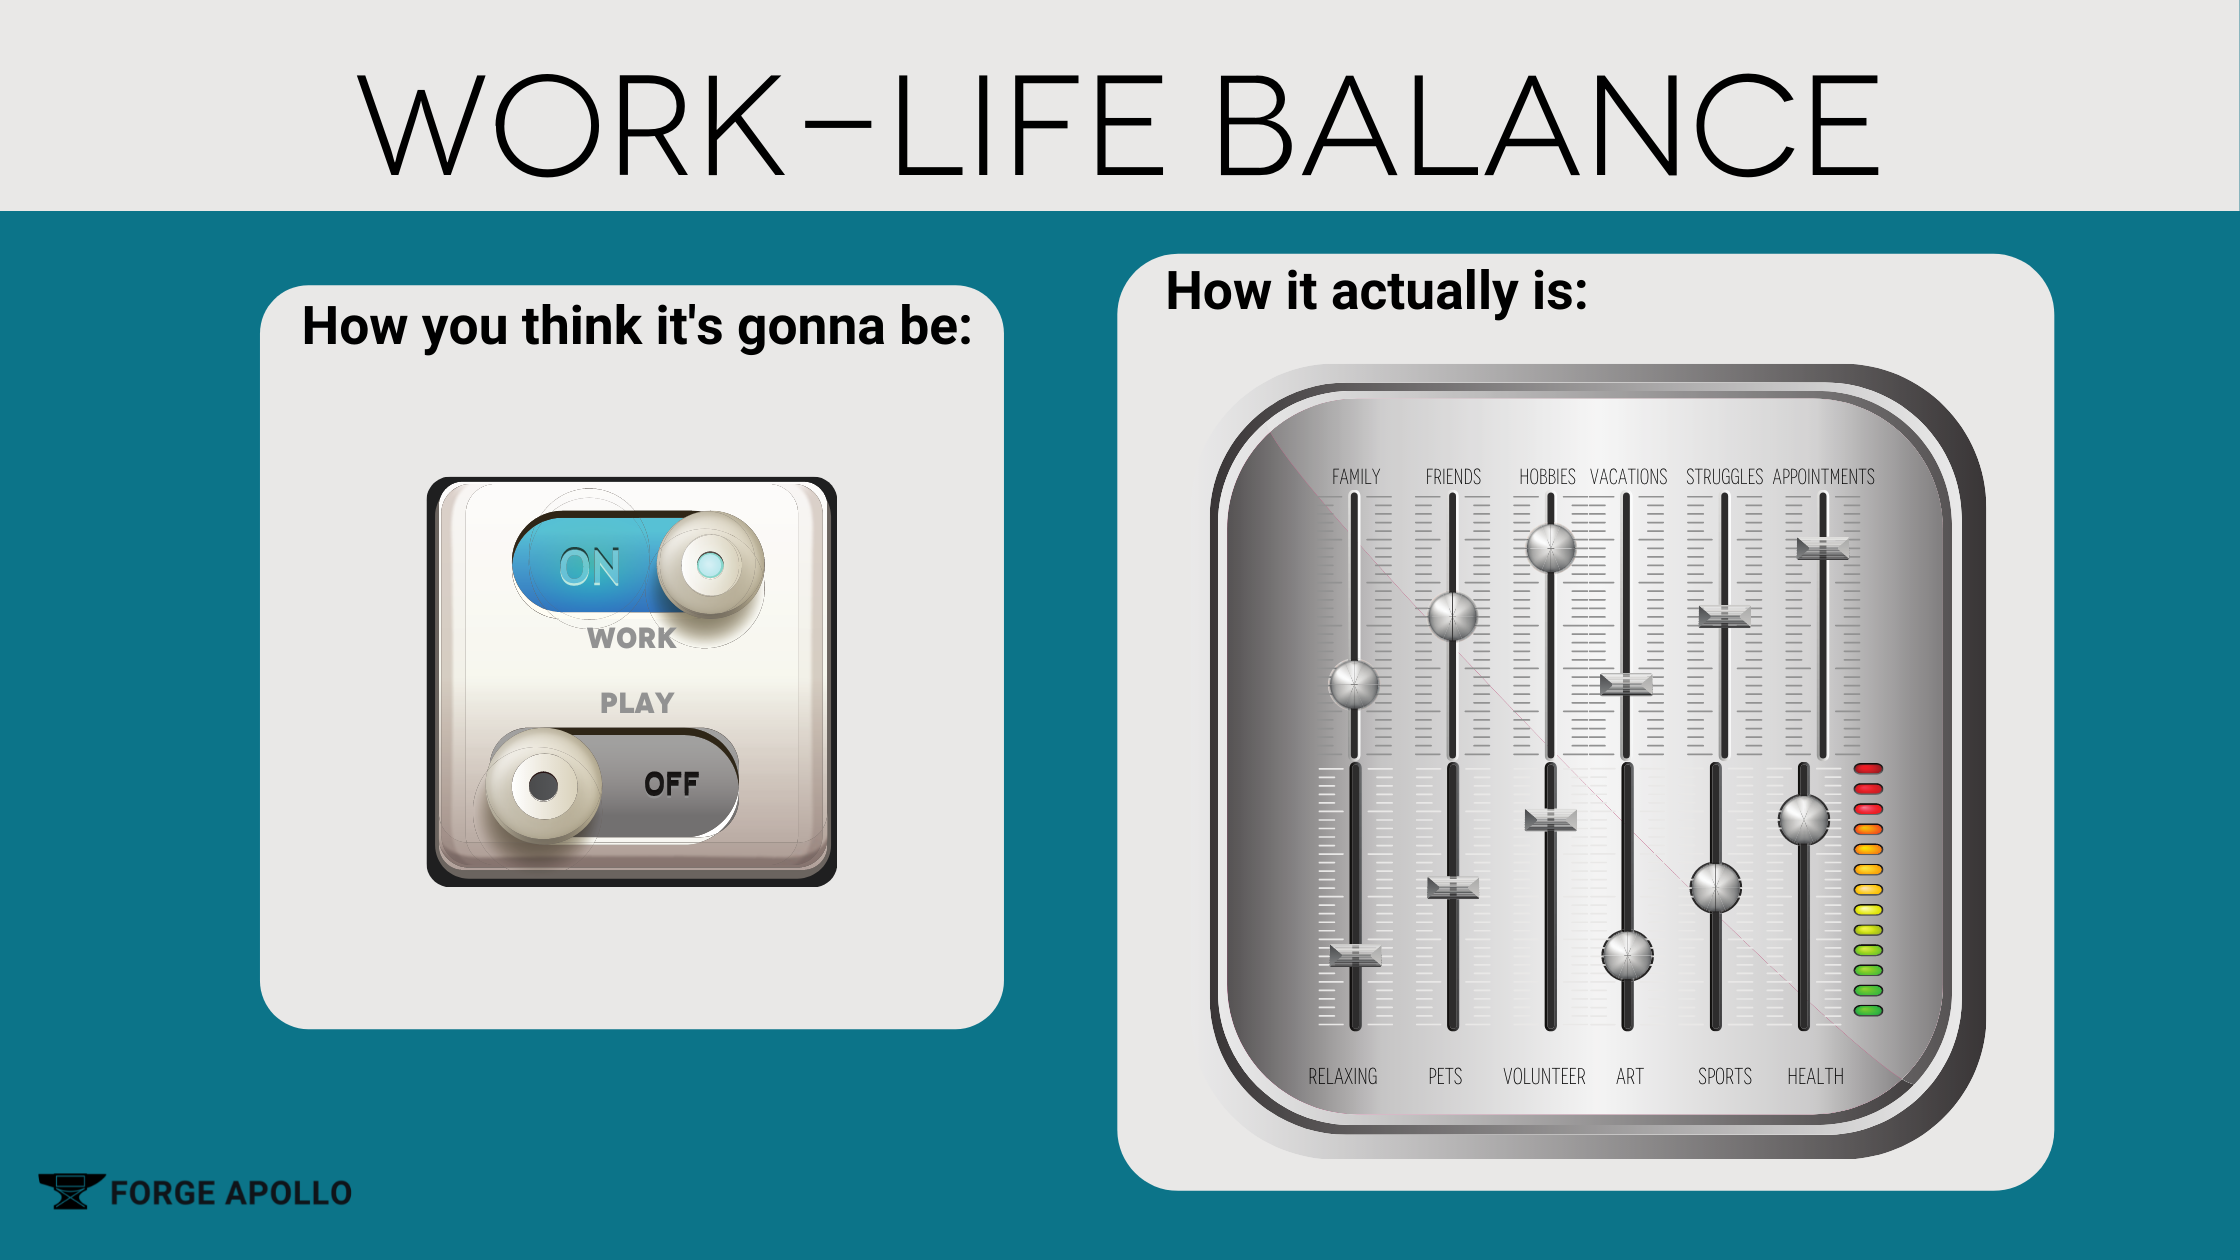 work life balance is more complicated than it seems